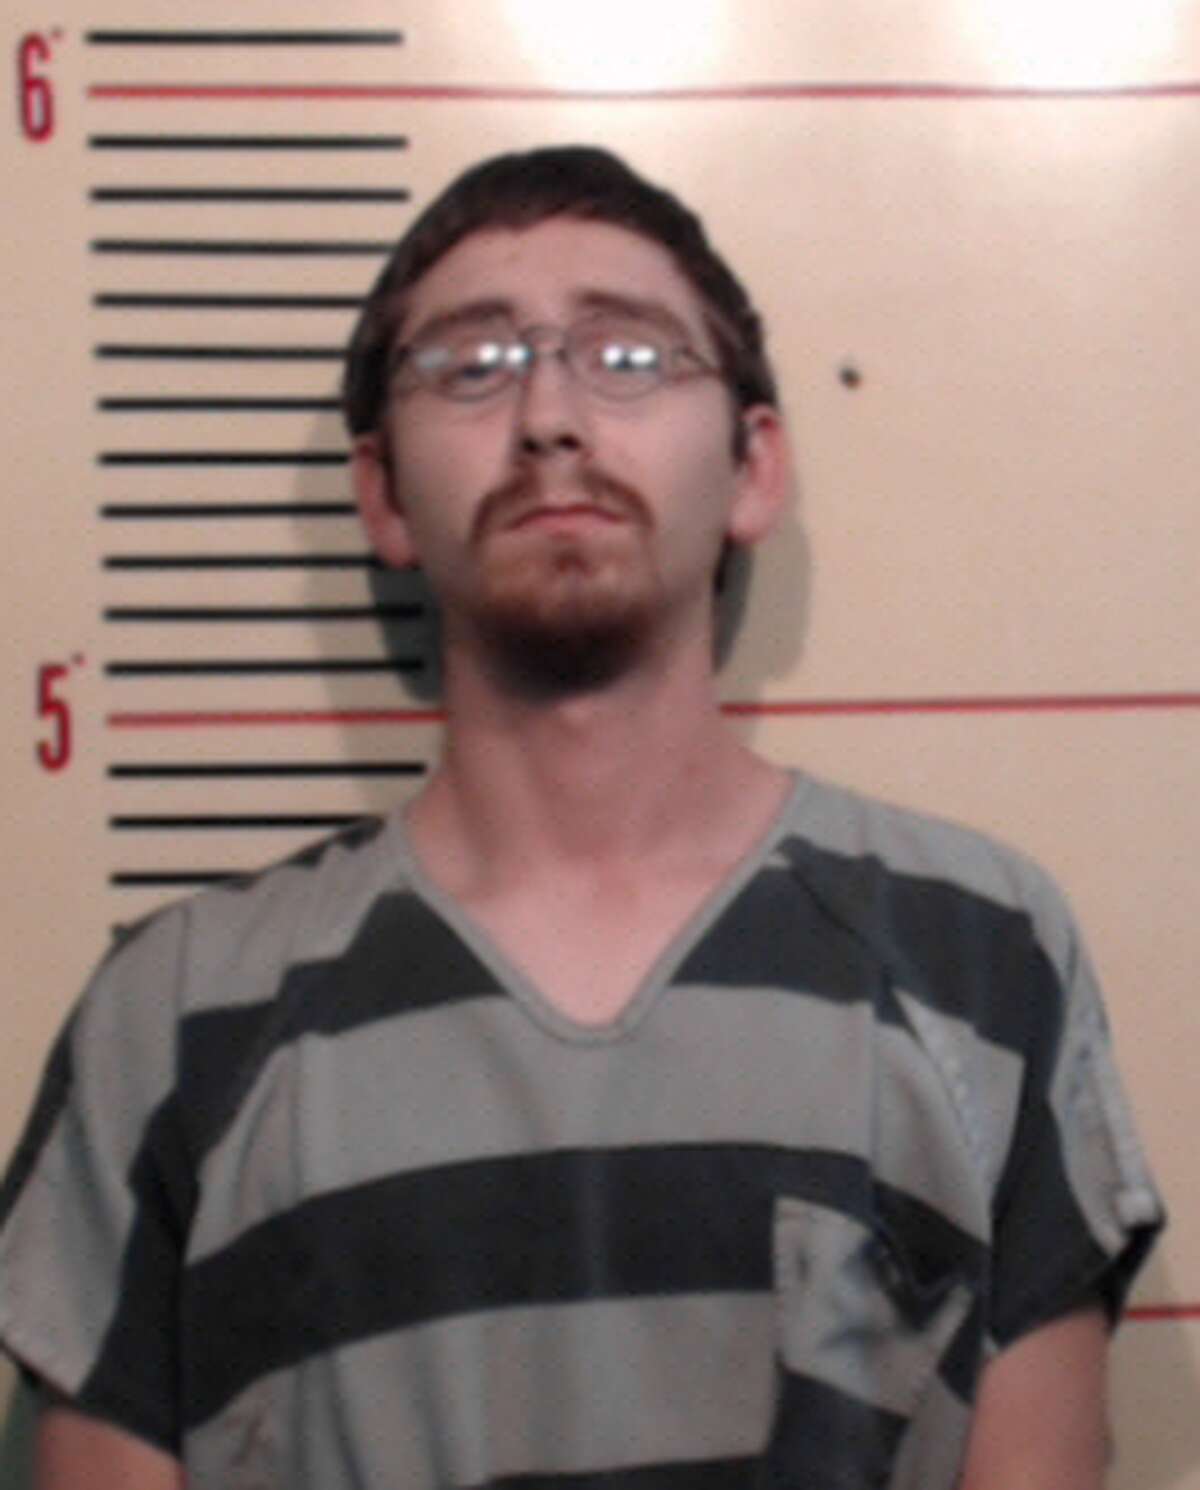 Kevin Lee Roberts, 22, was arrested Wednesday in connection with the murder of Ashley Williams, 21.